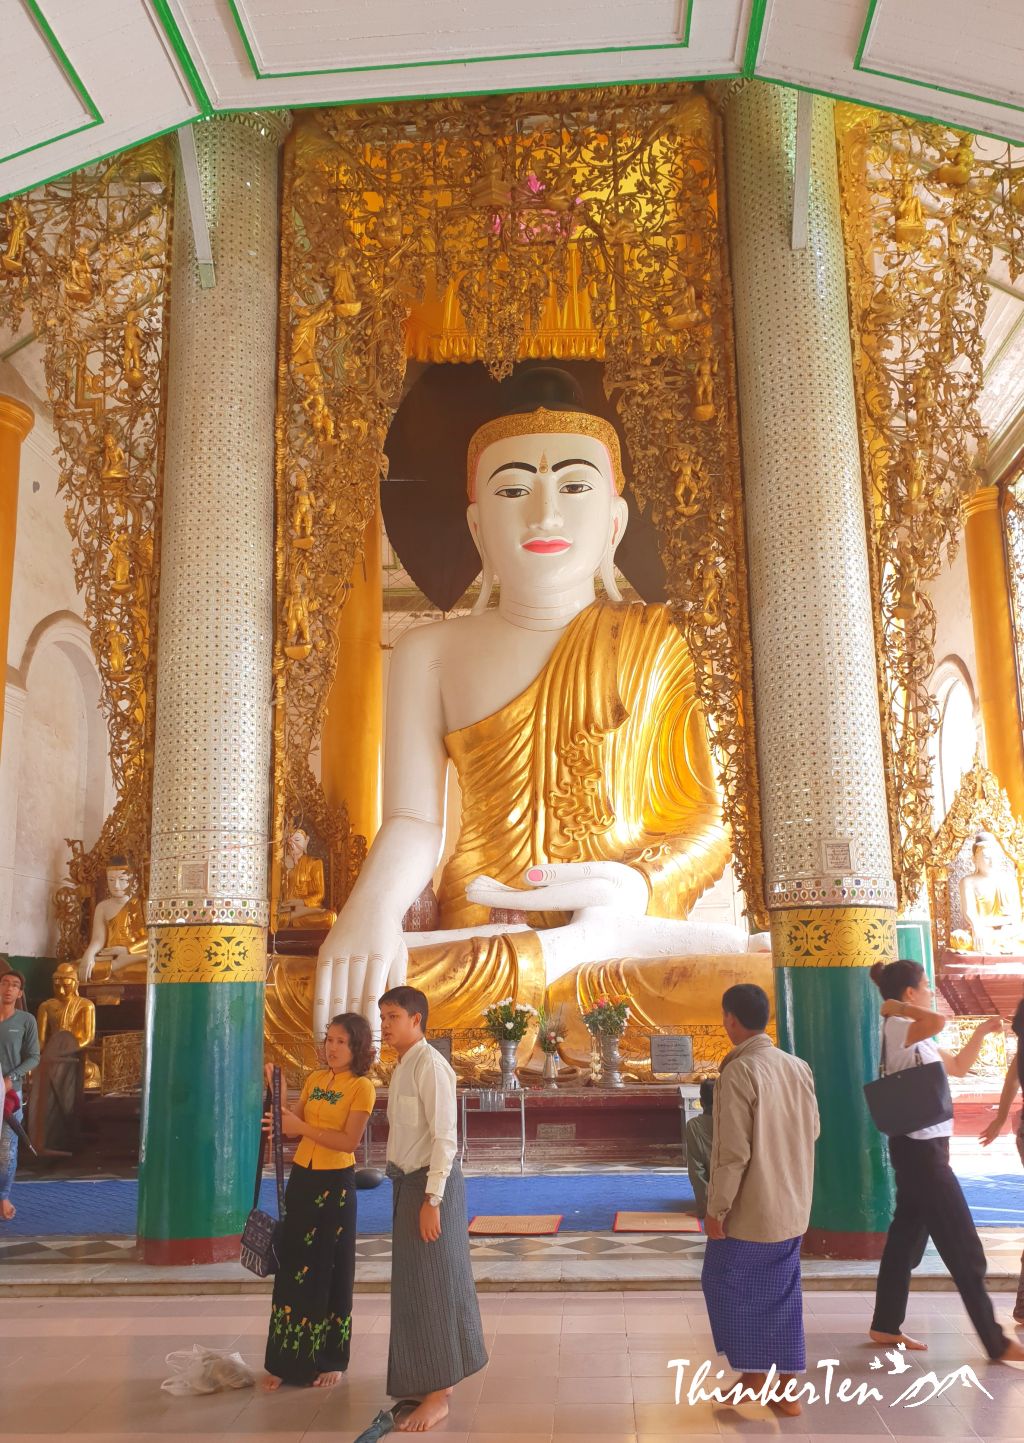 Myanmar Pride : Finding Treasure in Oldest Buddhist Stupa in the World ...